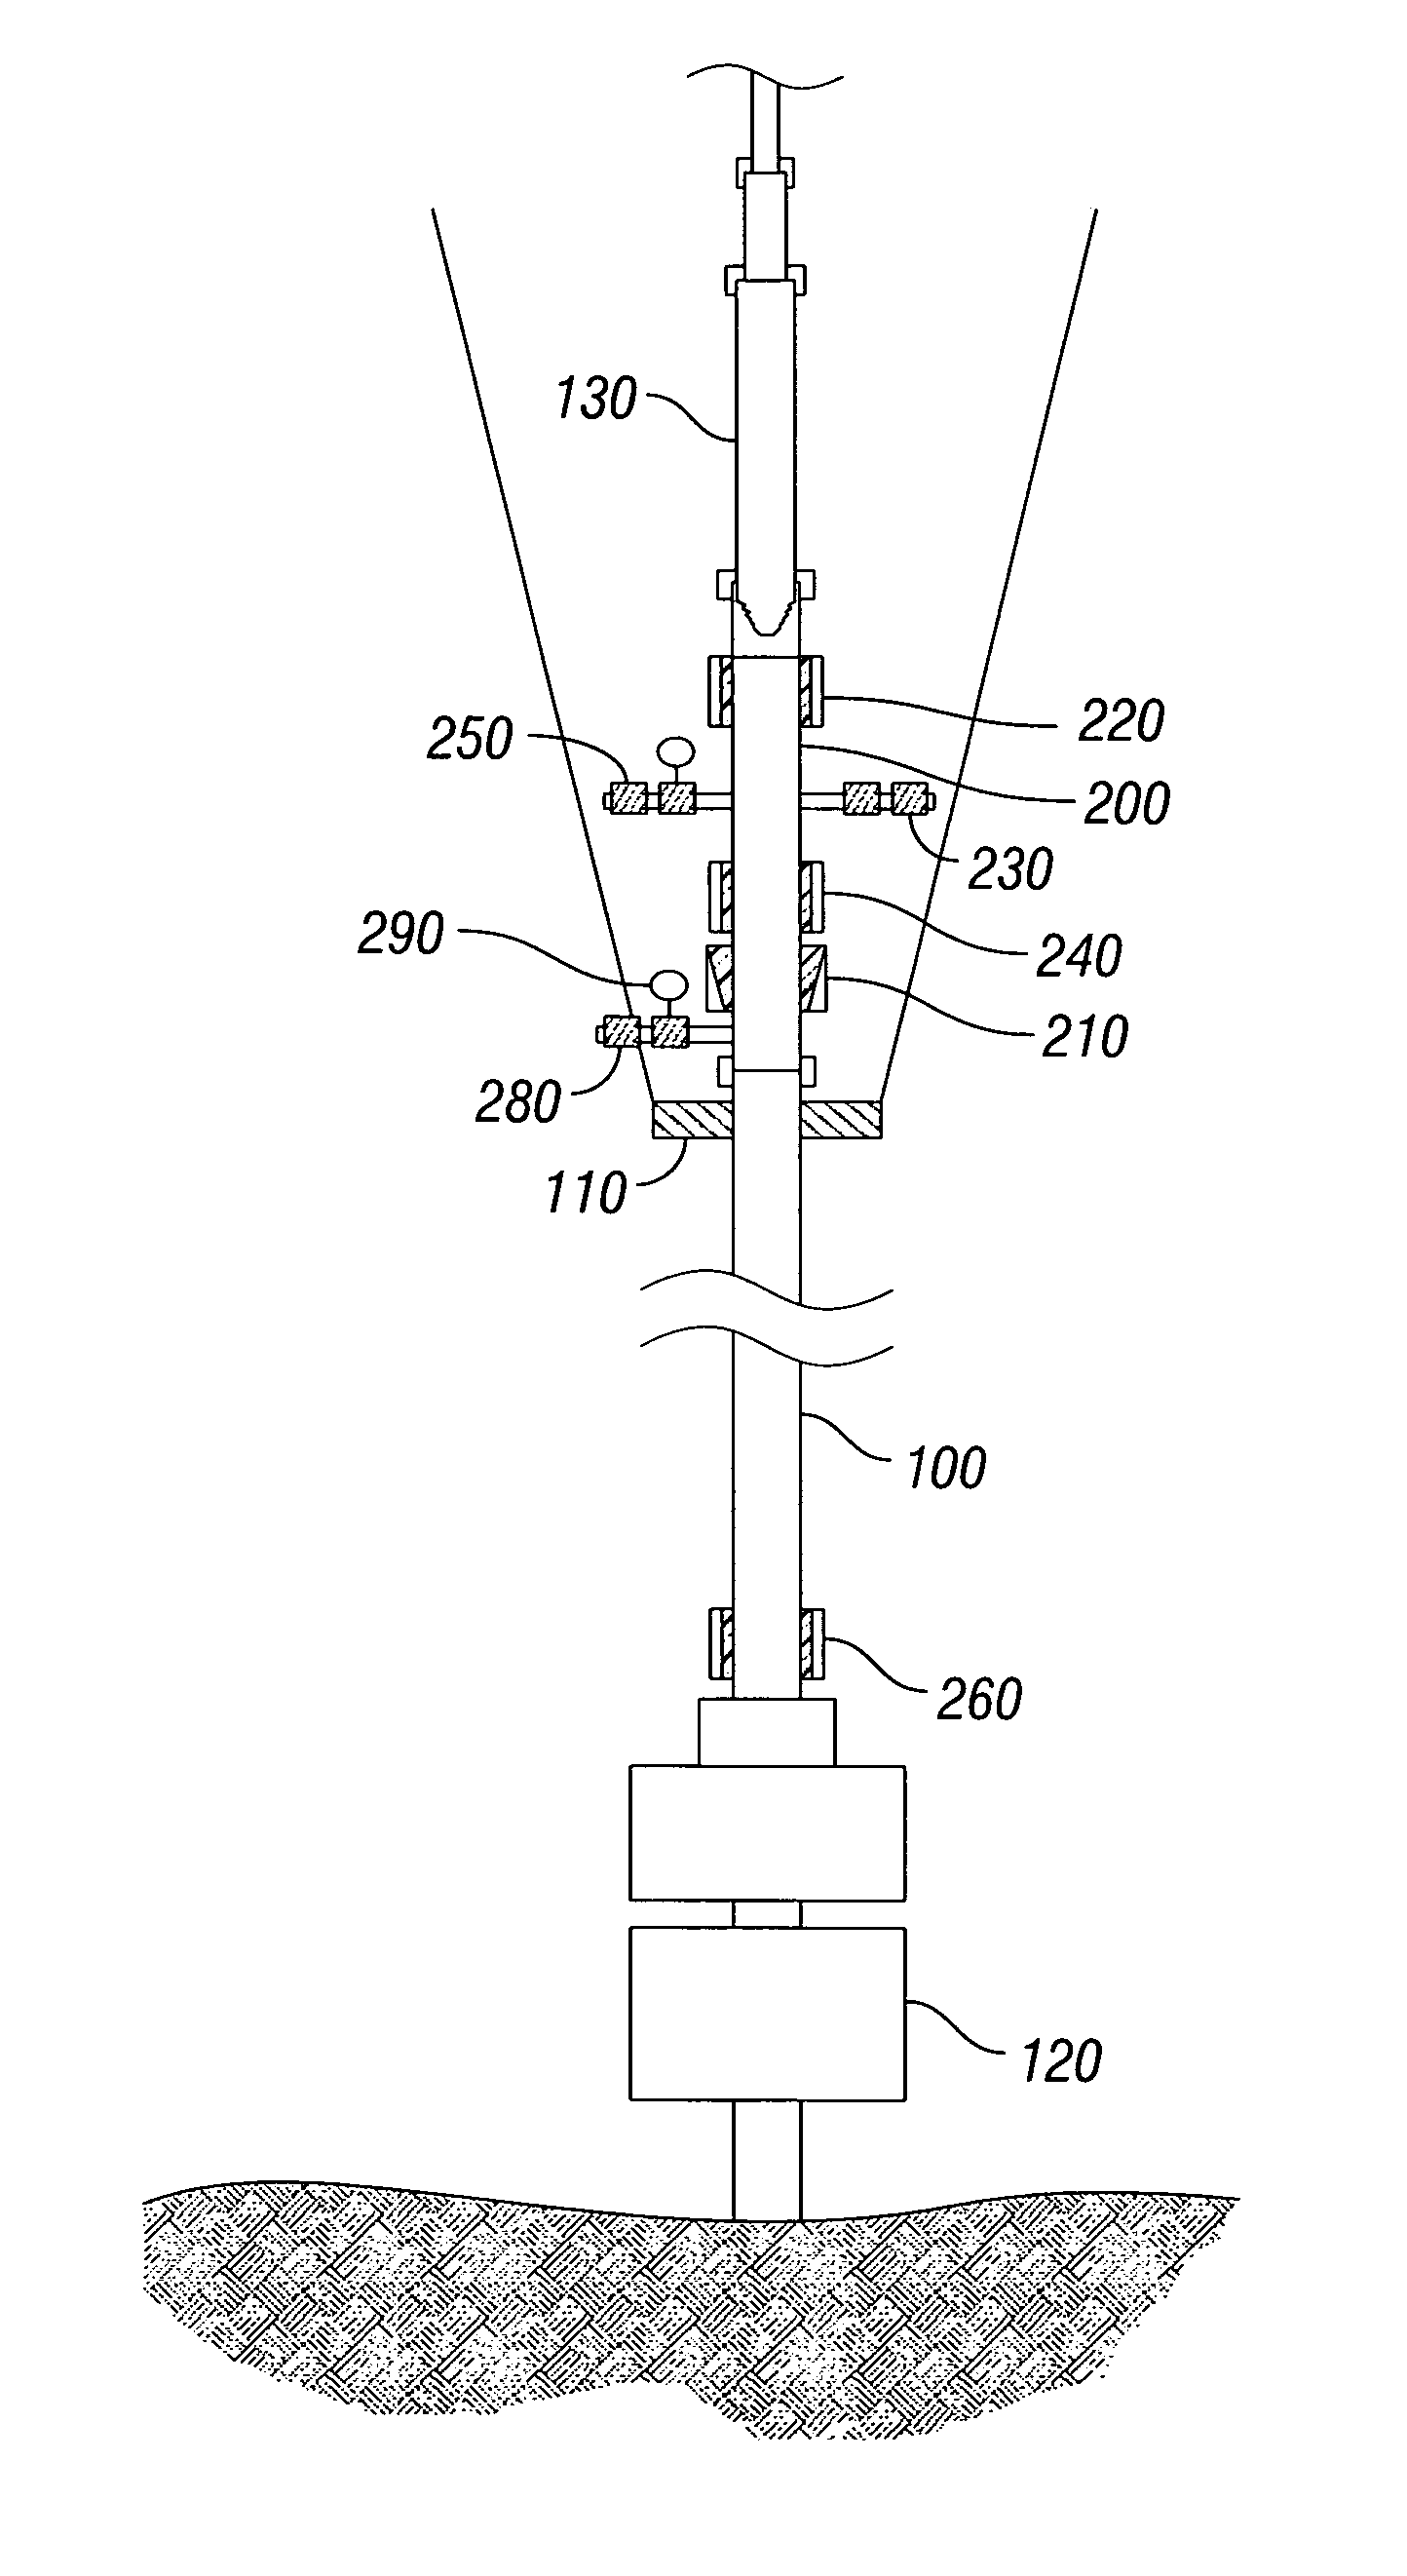 Apparatus and method for managed pressure drilling